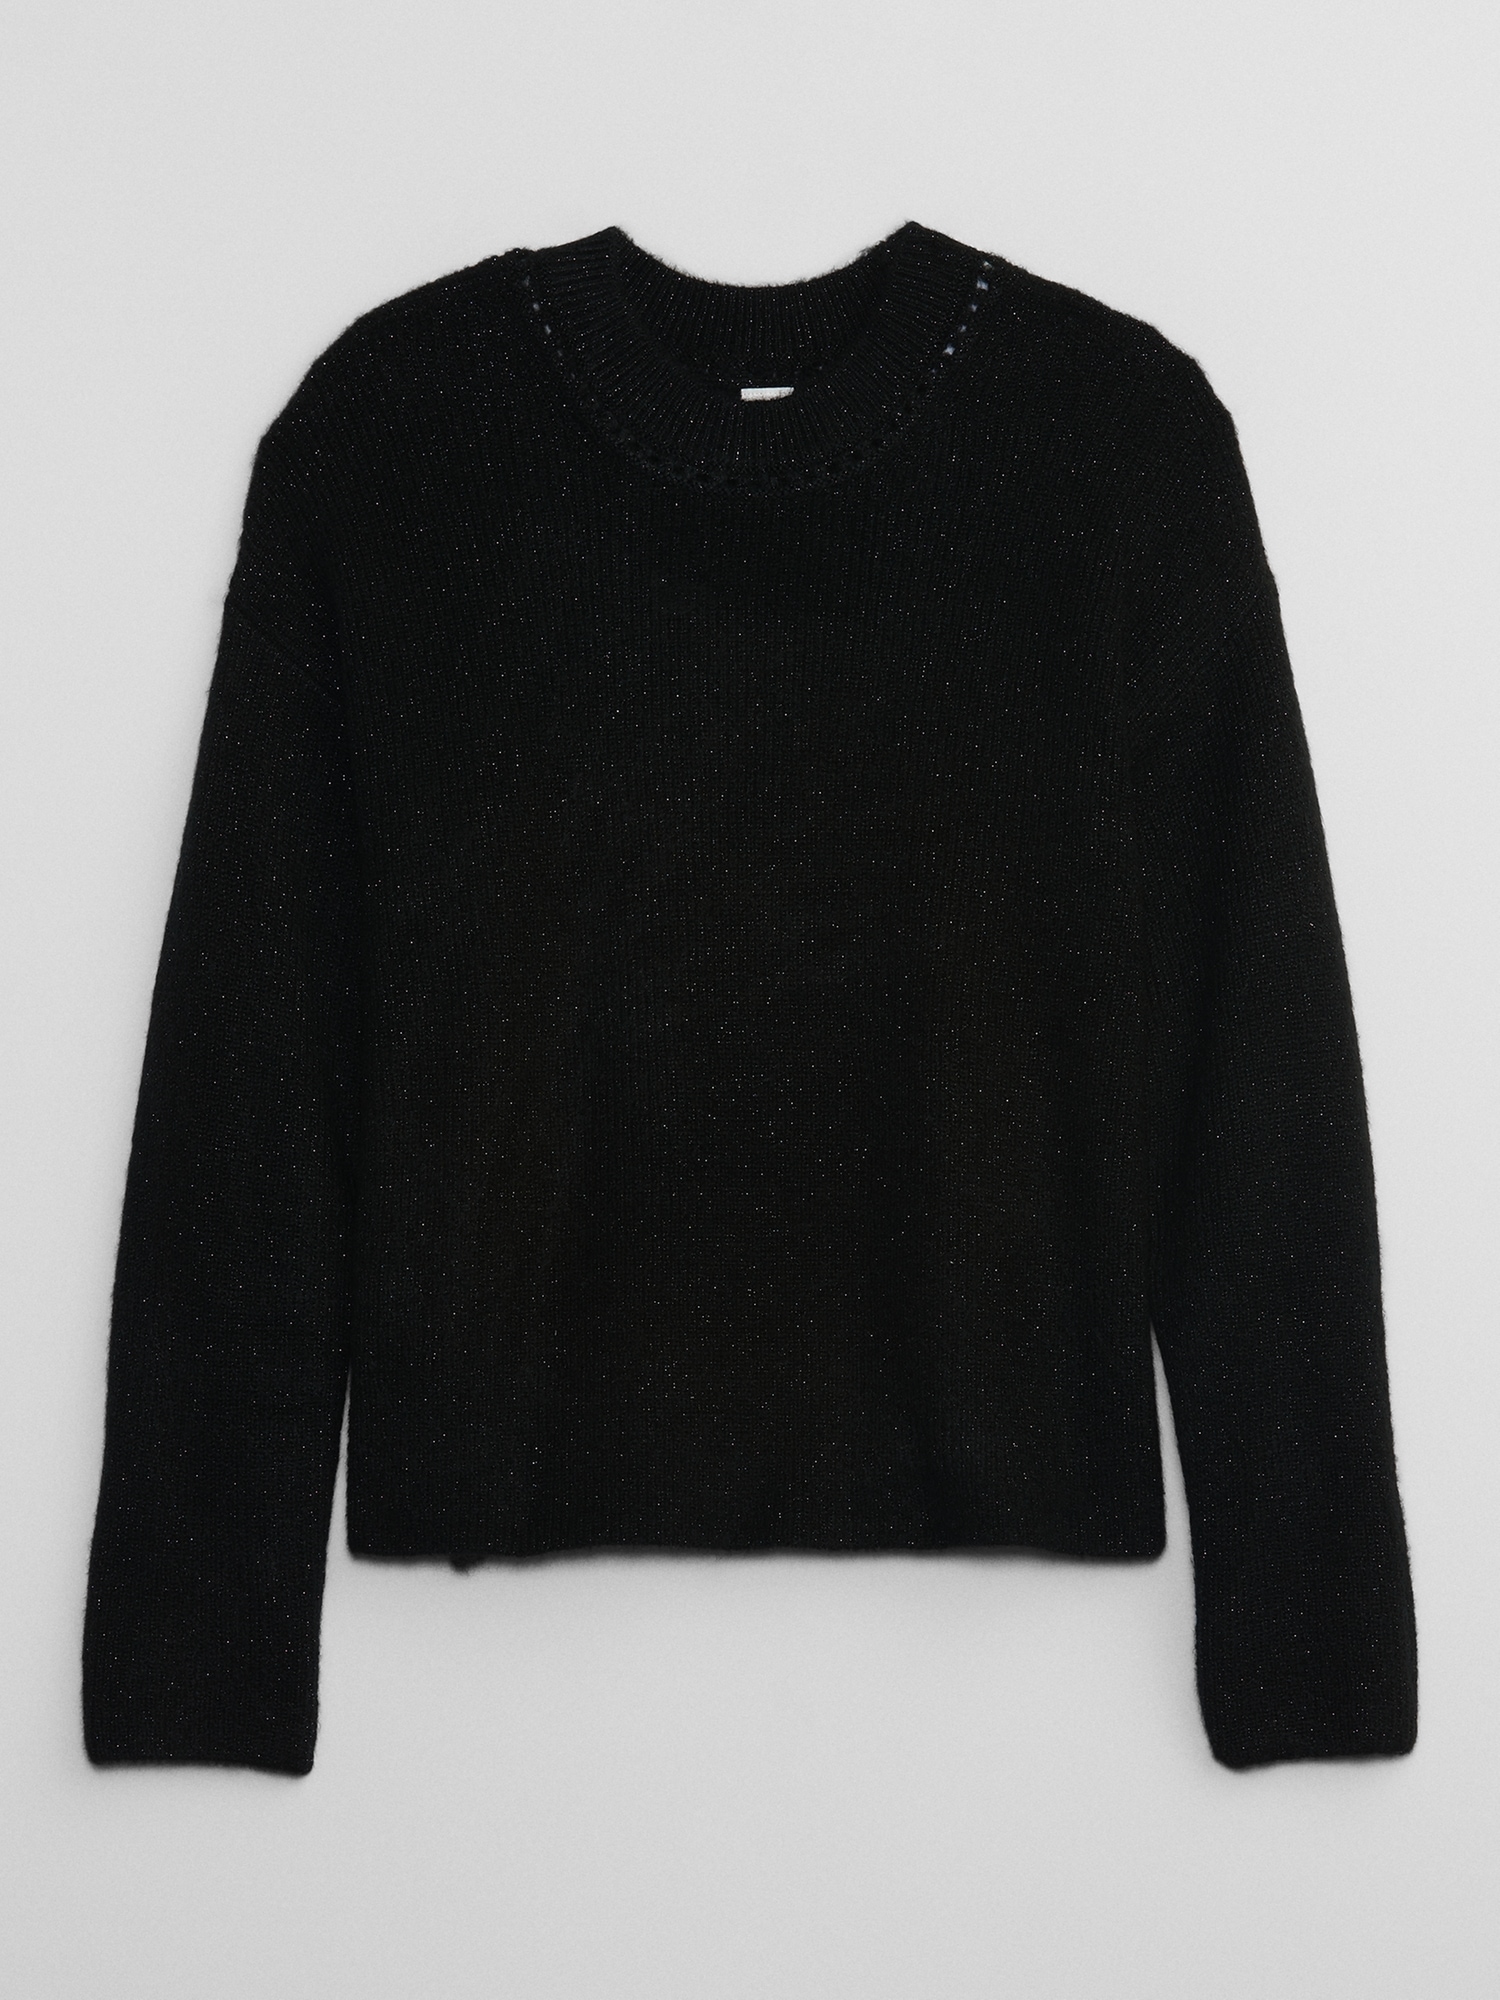 Relaxed Forever Cozy Ribbed Crewneck Sweater | Gap Factory